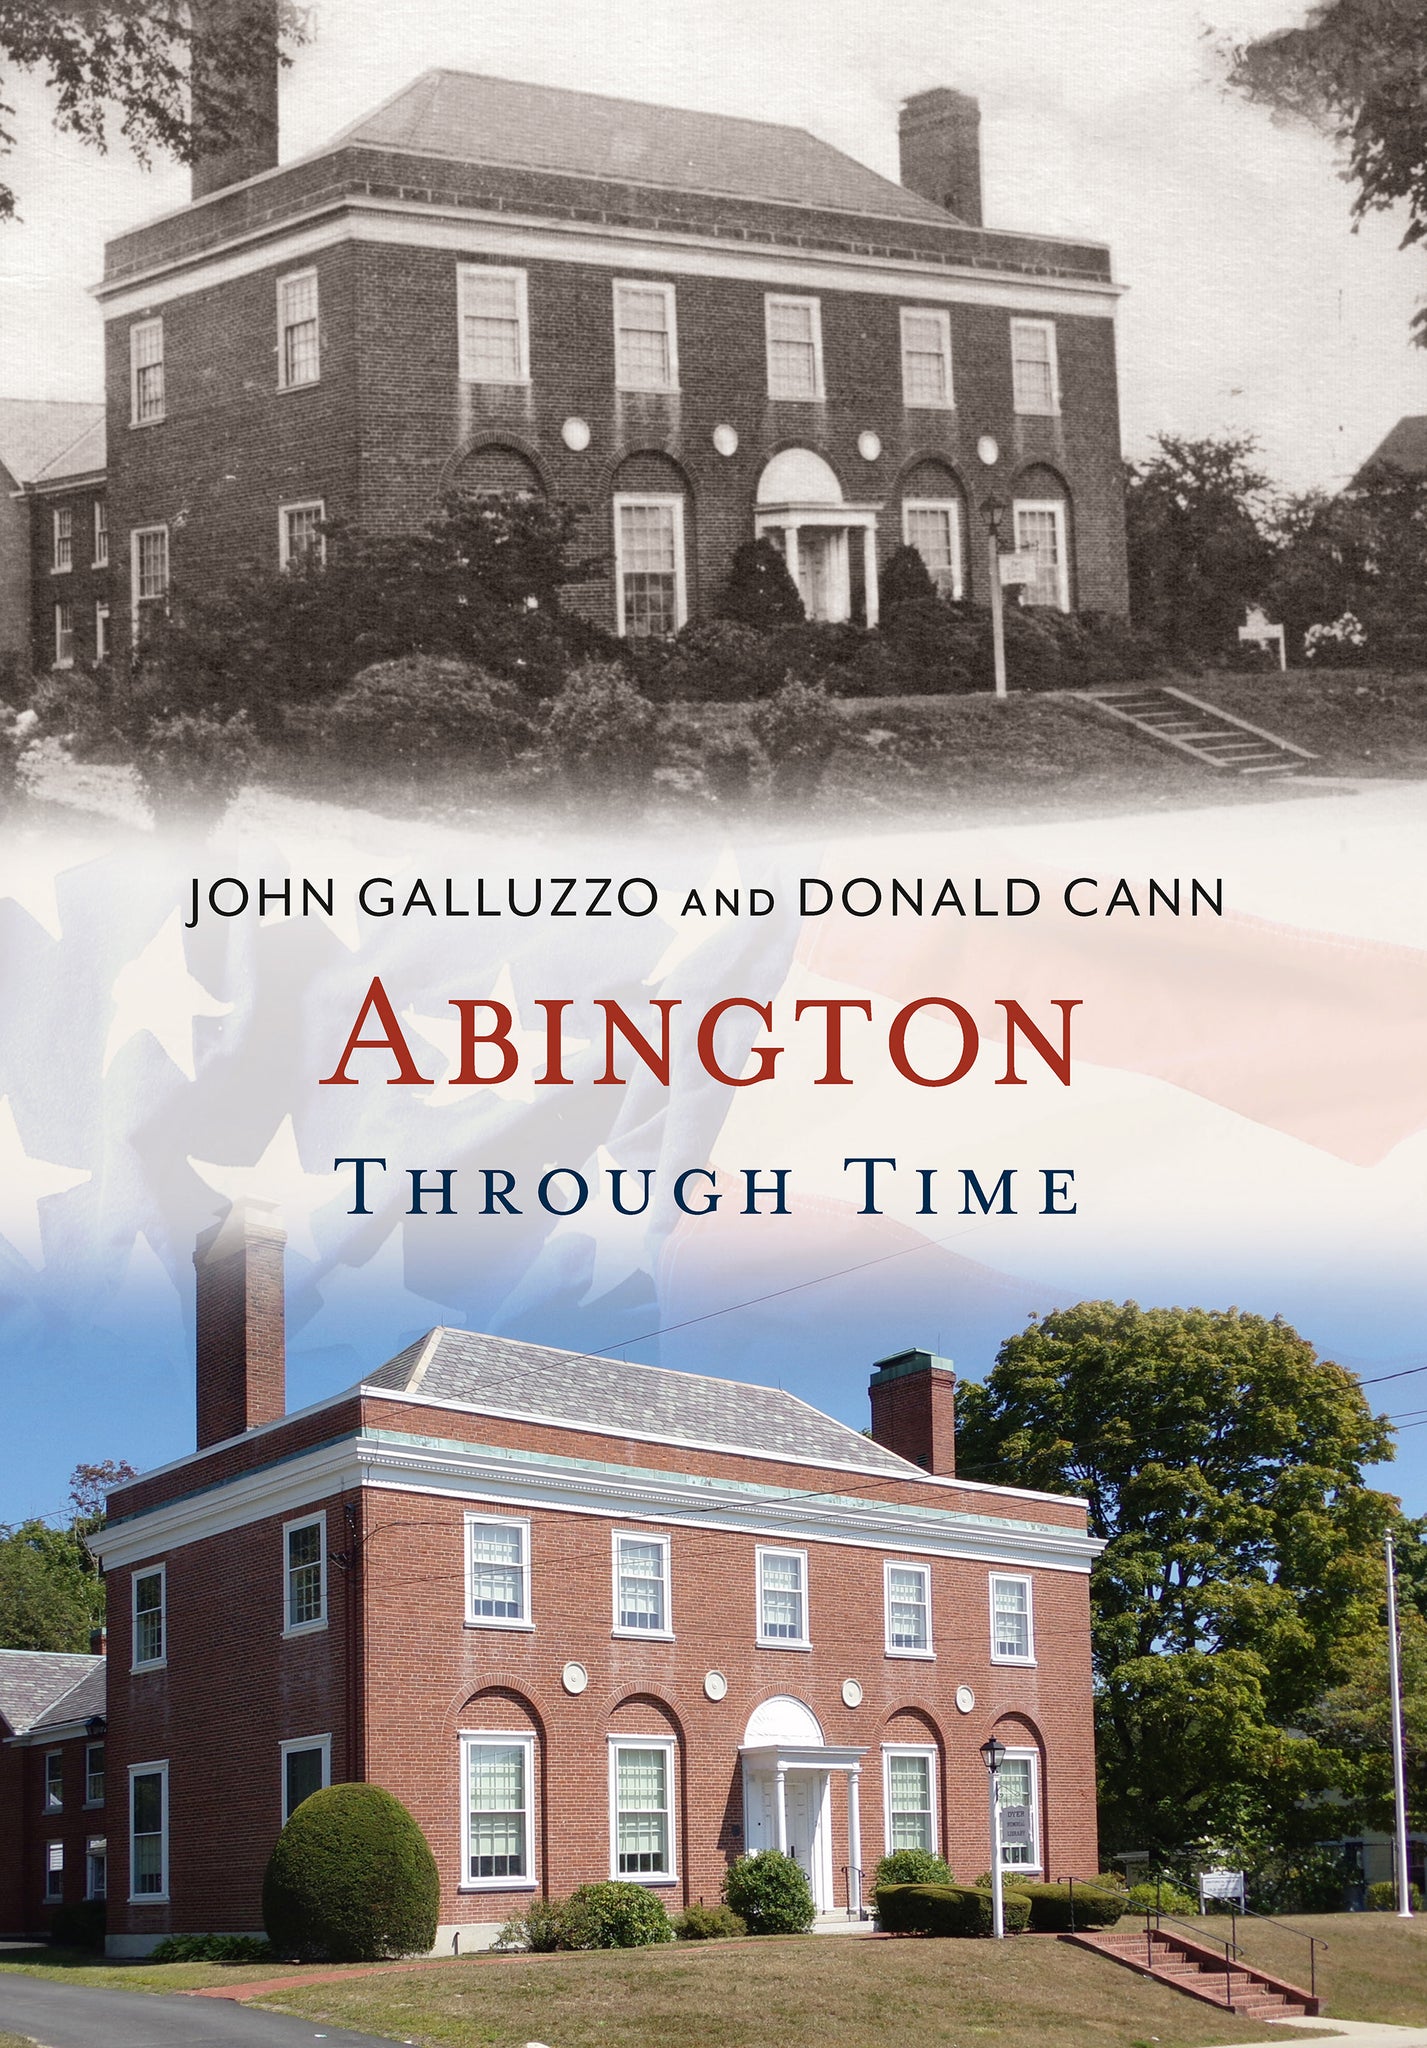 Abington Through Time - available now from America Through Time